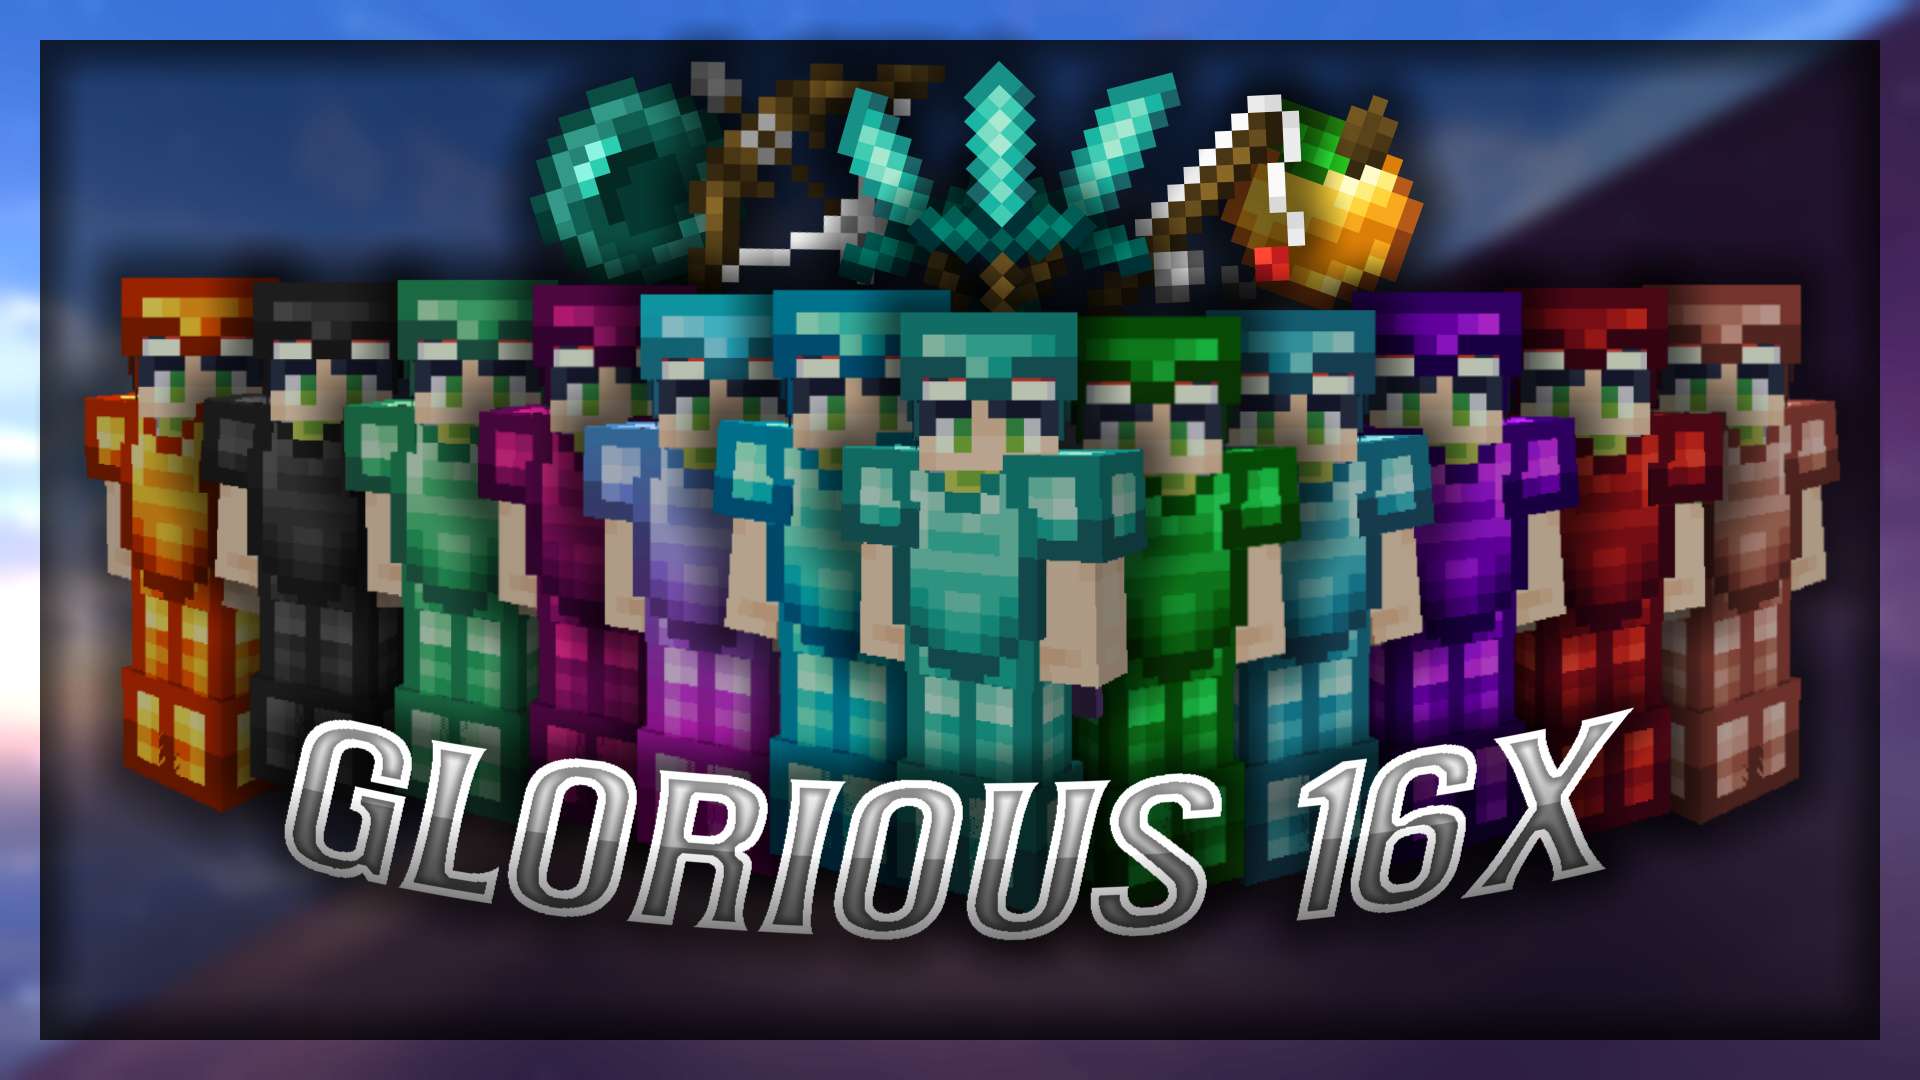 (open zip with WinRAR) Glorious - Purple 16 by Mek on PvPRP